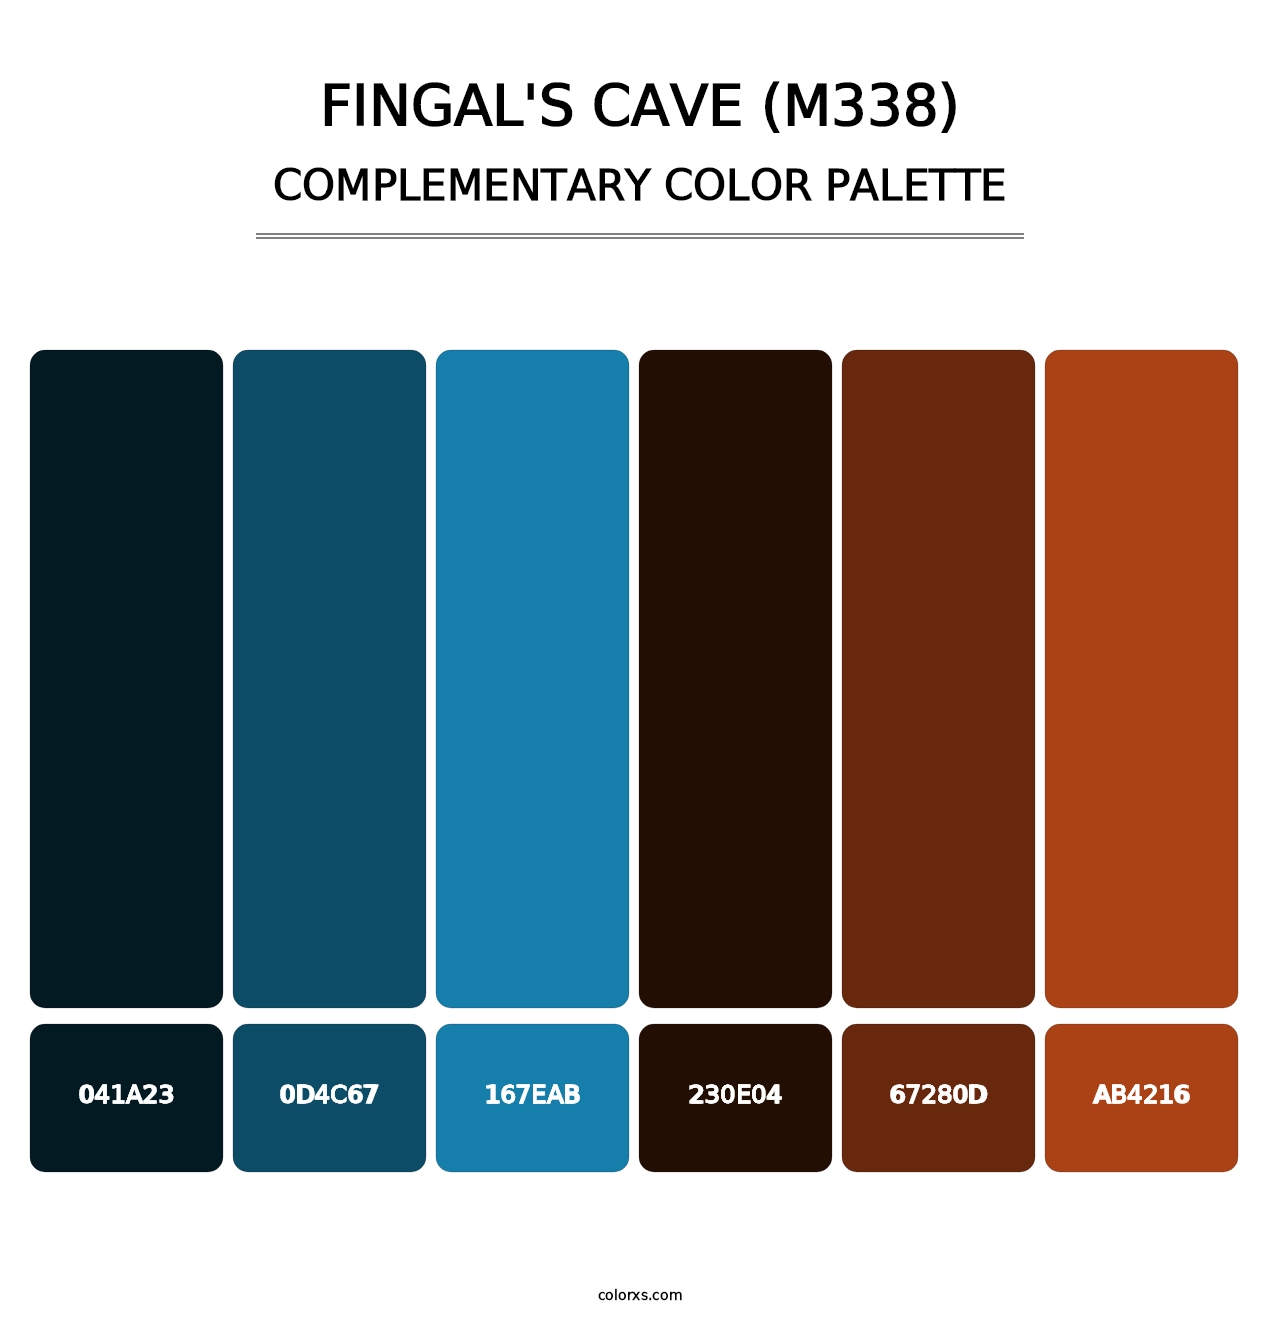 Fingal's Cave (M338) - Complementary Color Palette